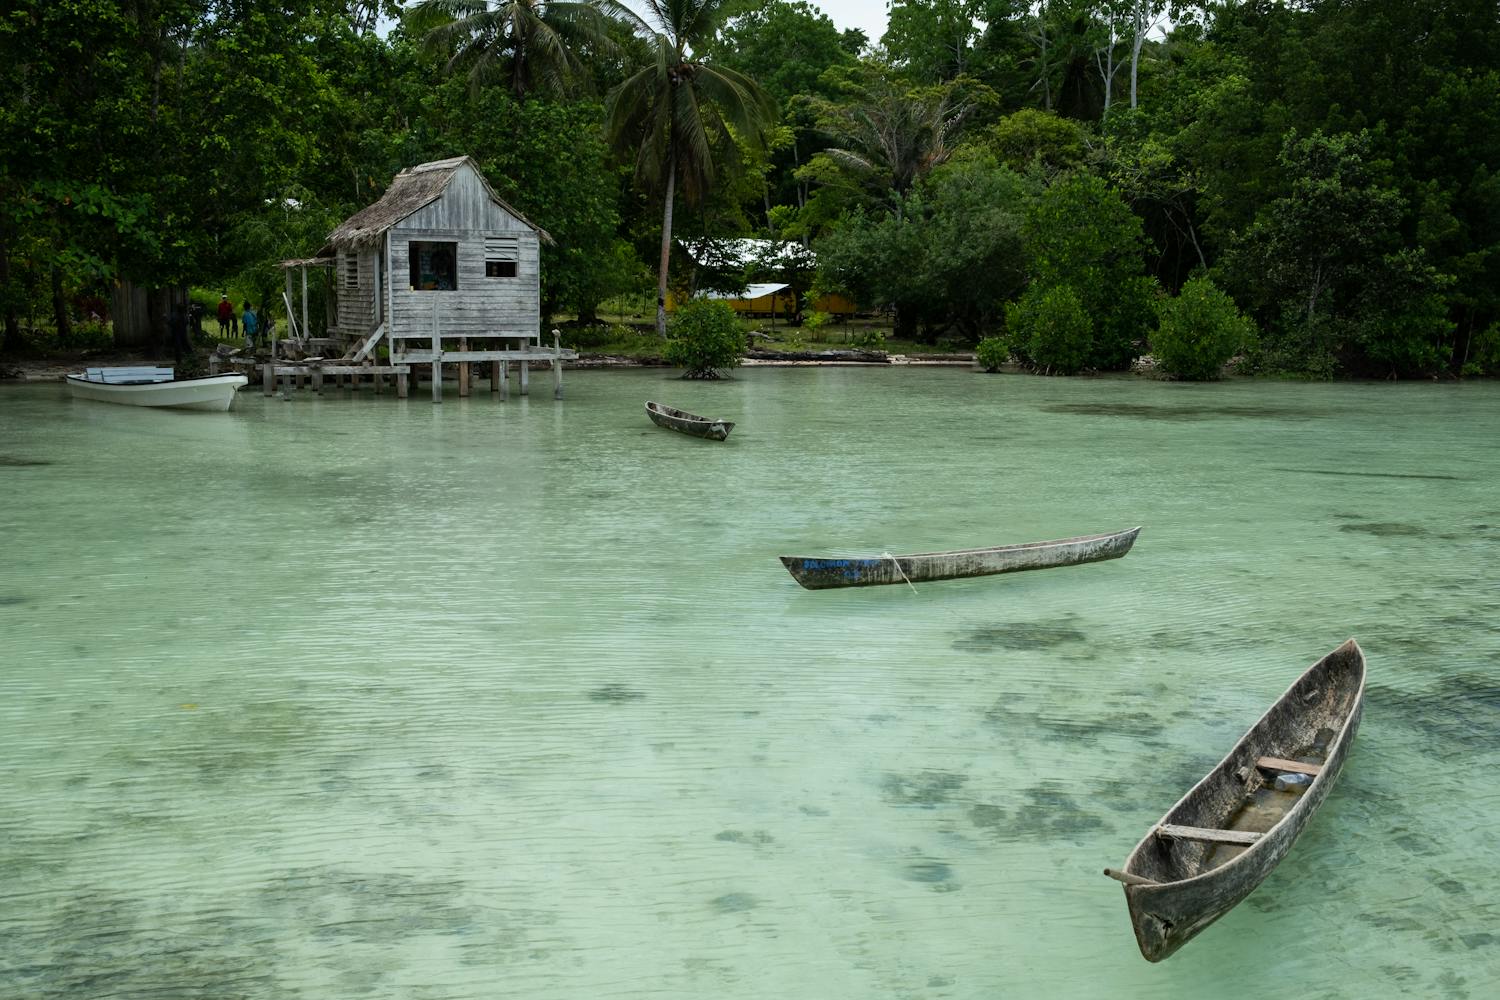 Boats on the water near a forest in the Solomon Islands.